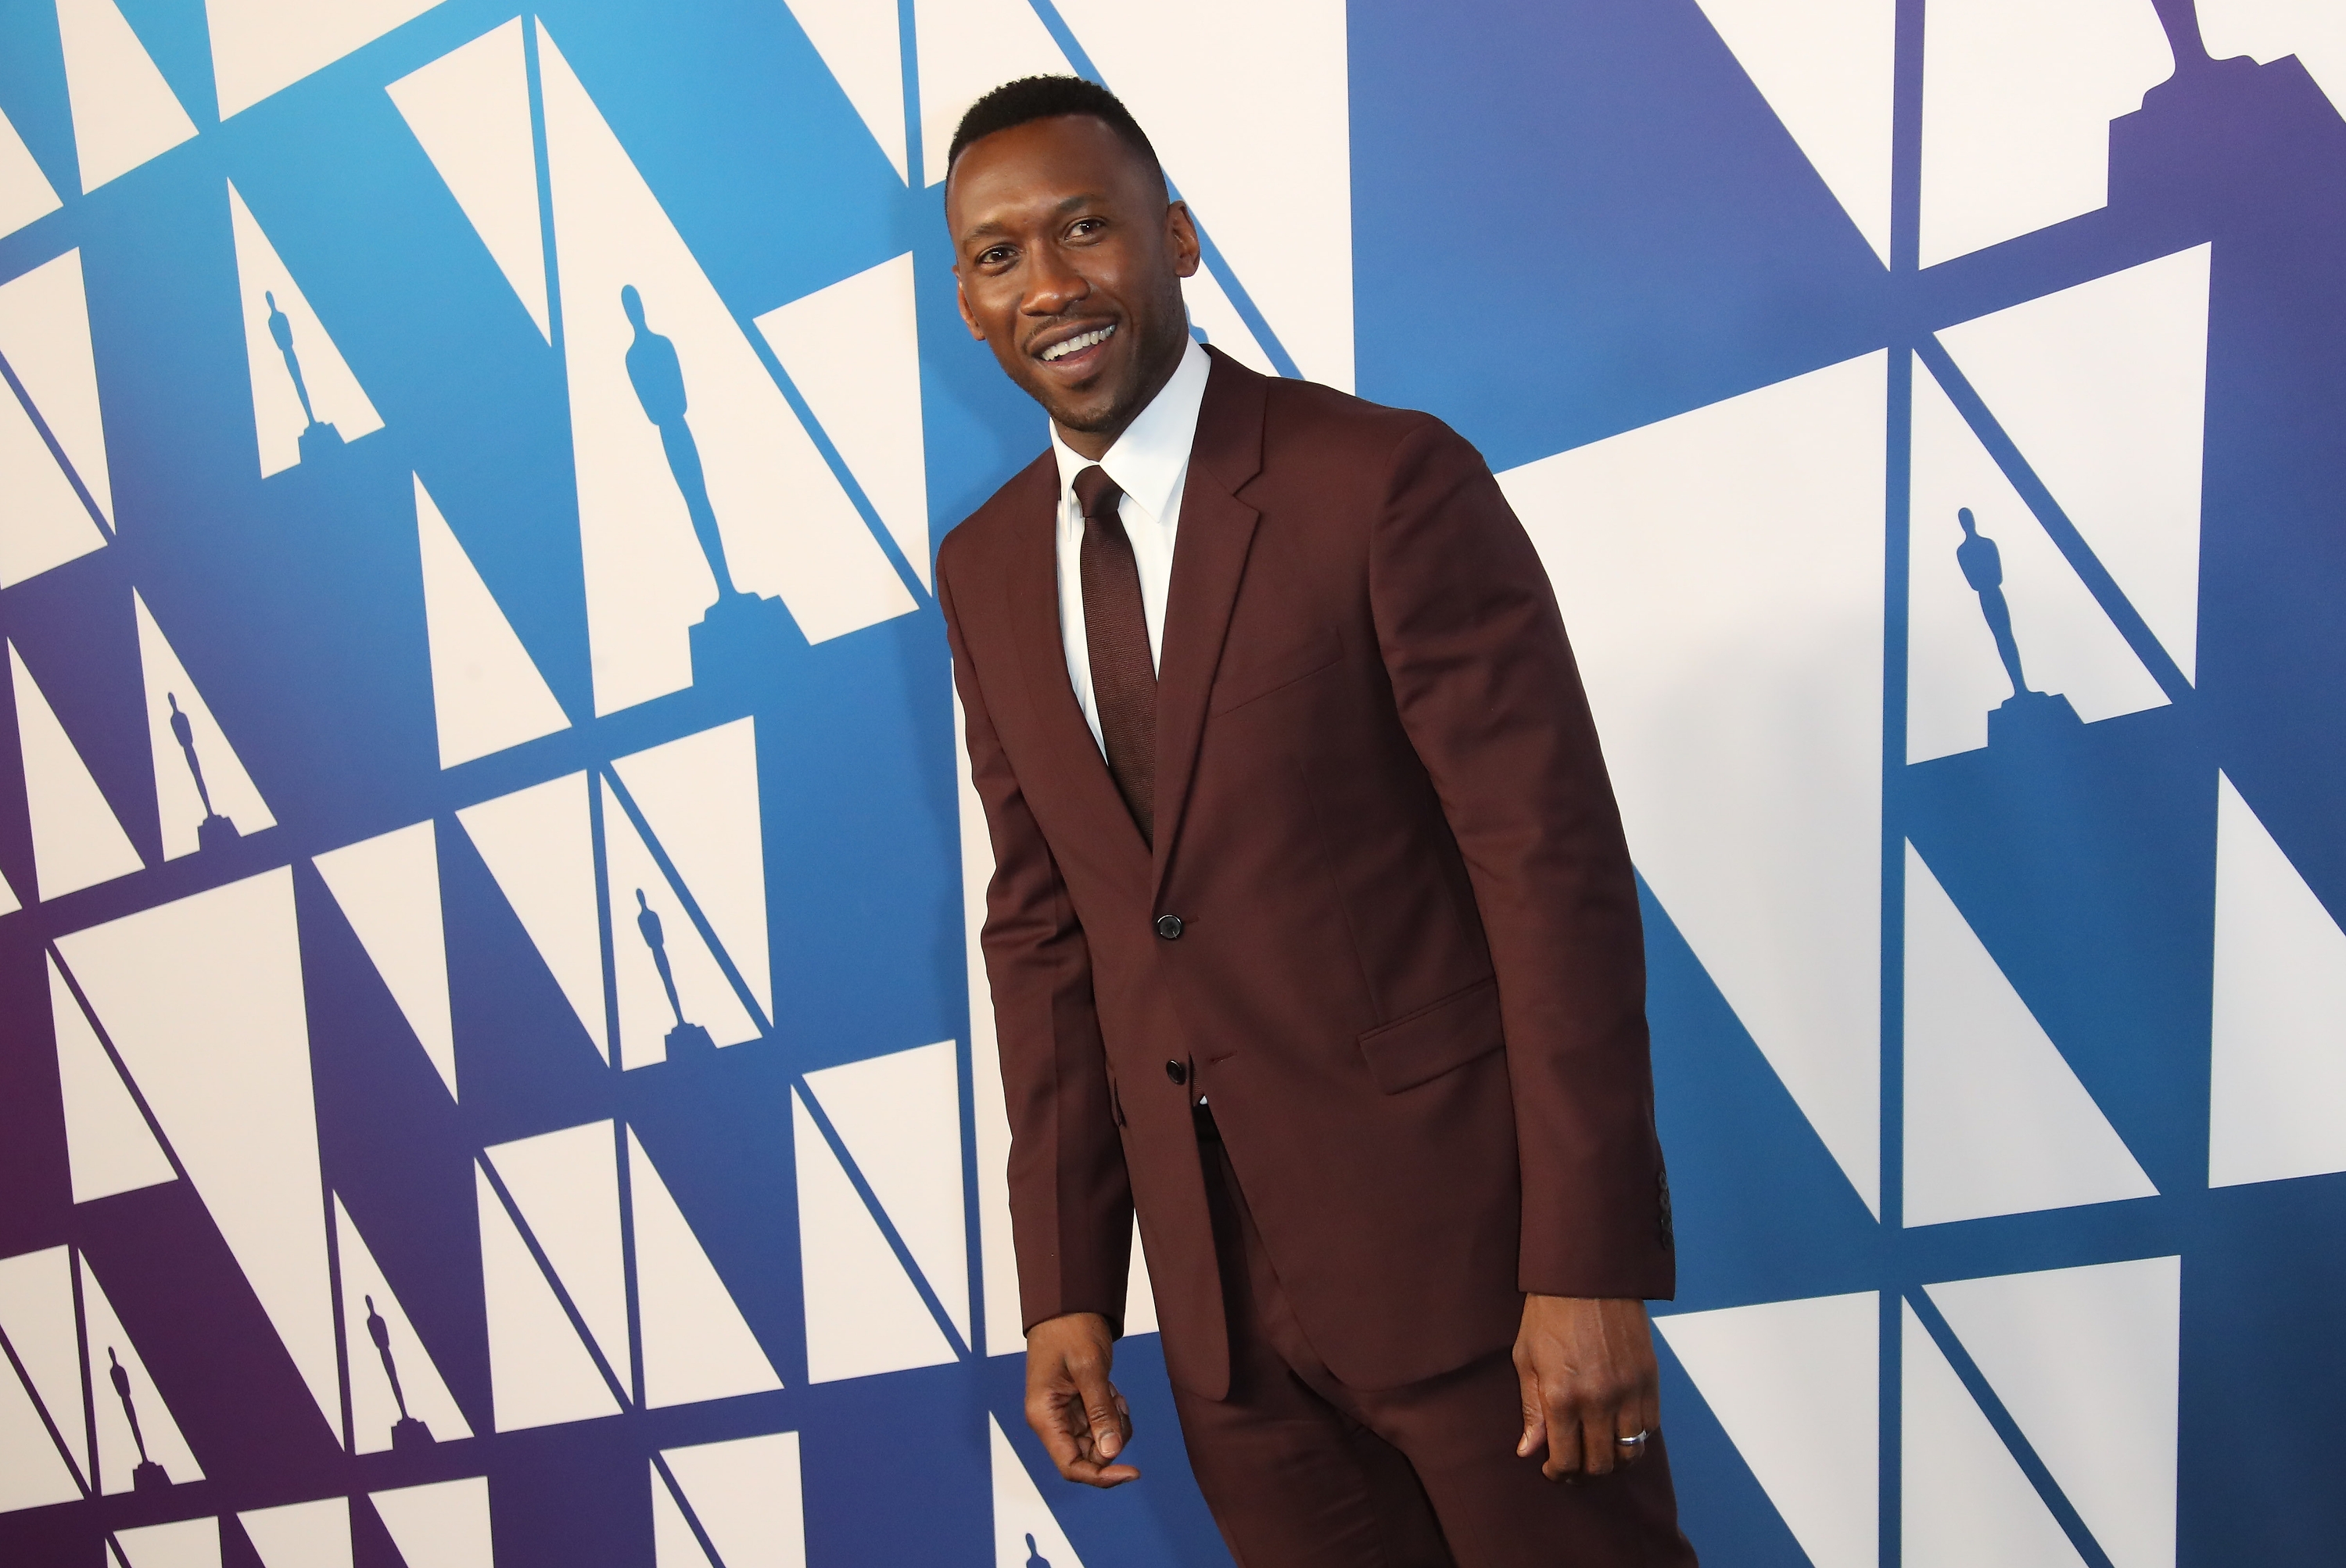 Mahershala Ali attends the 91st Oscars Nominees Luncheon